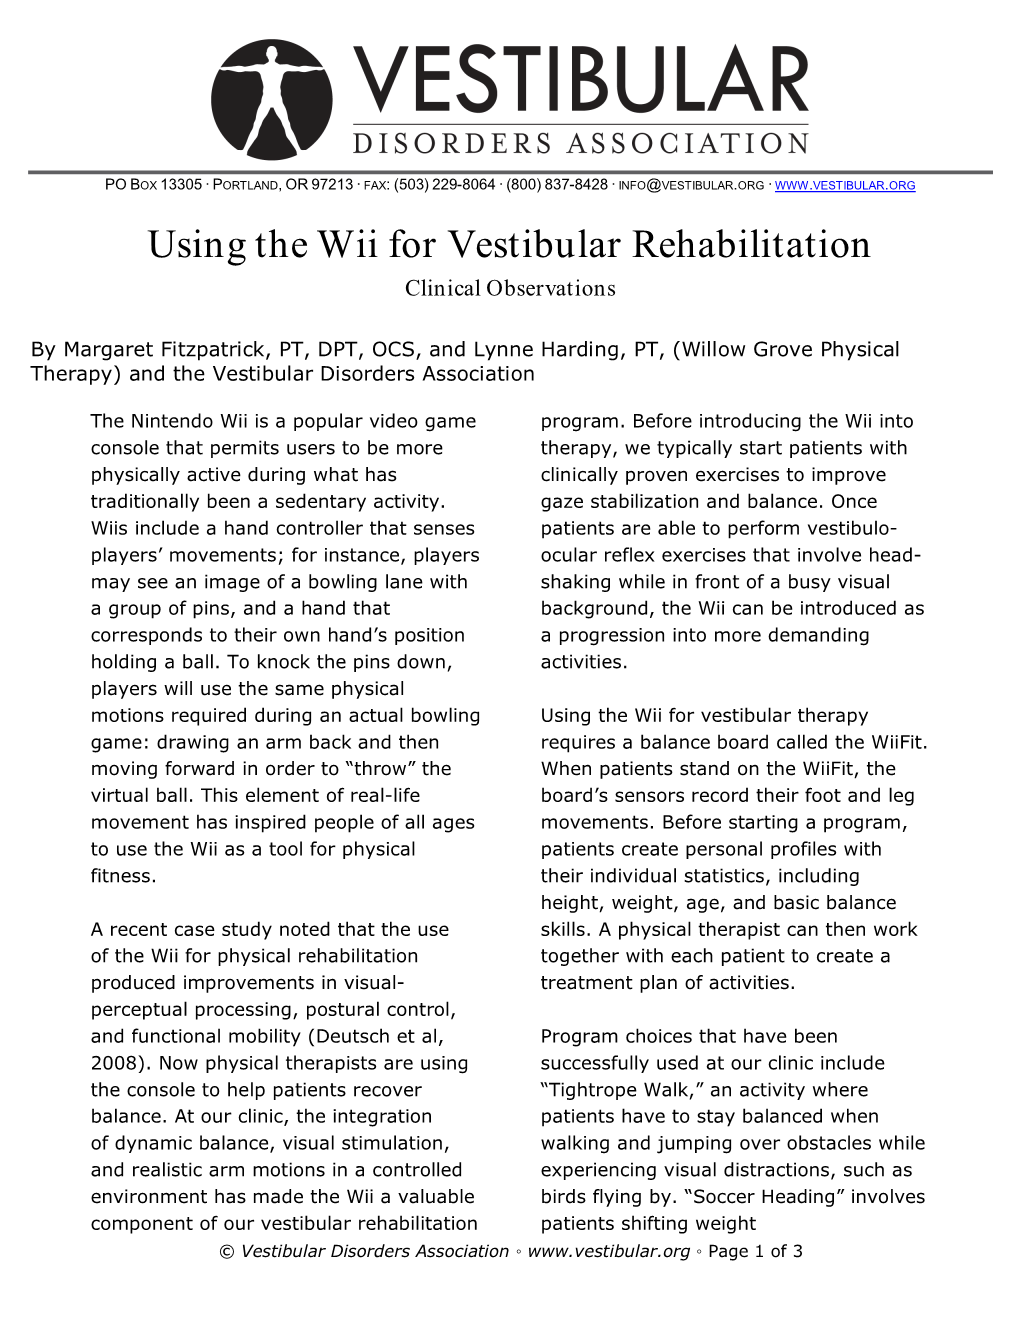 Using the Wii for Vestibular Rehabilitation Clinical Observations